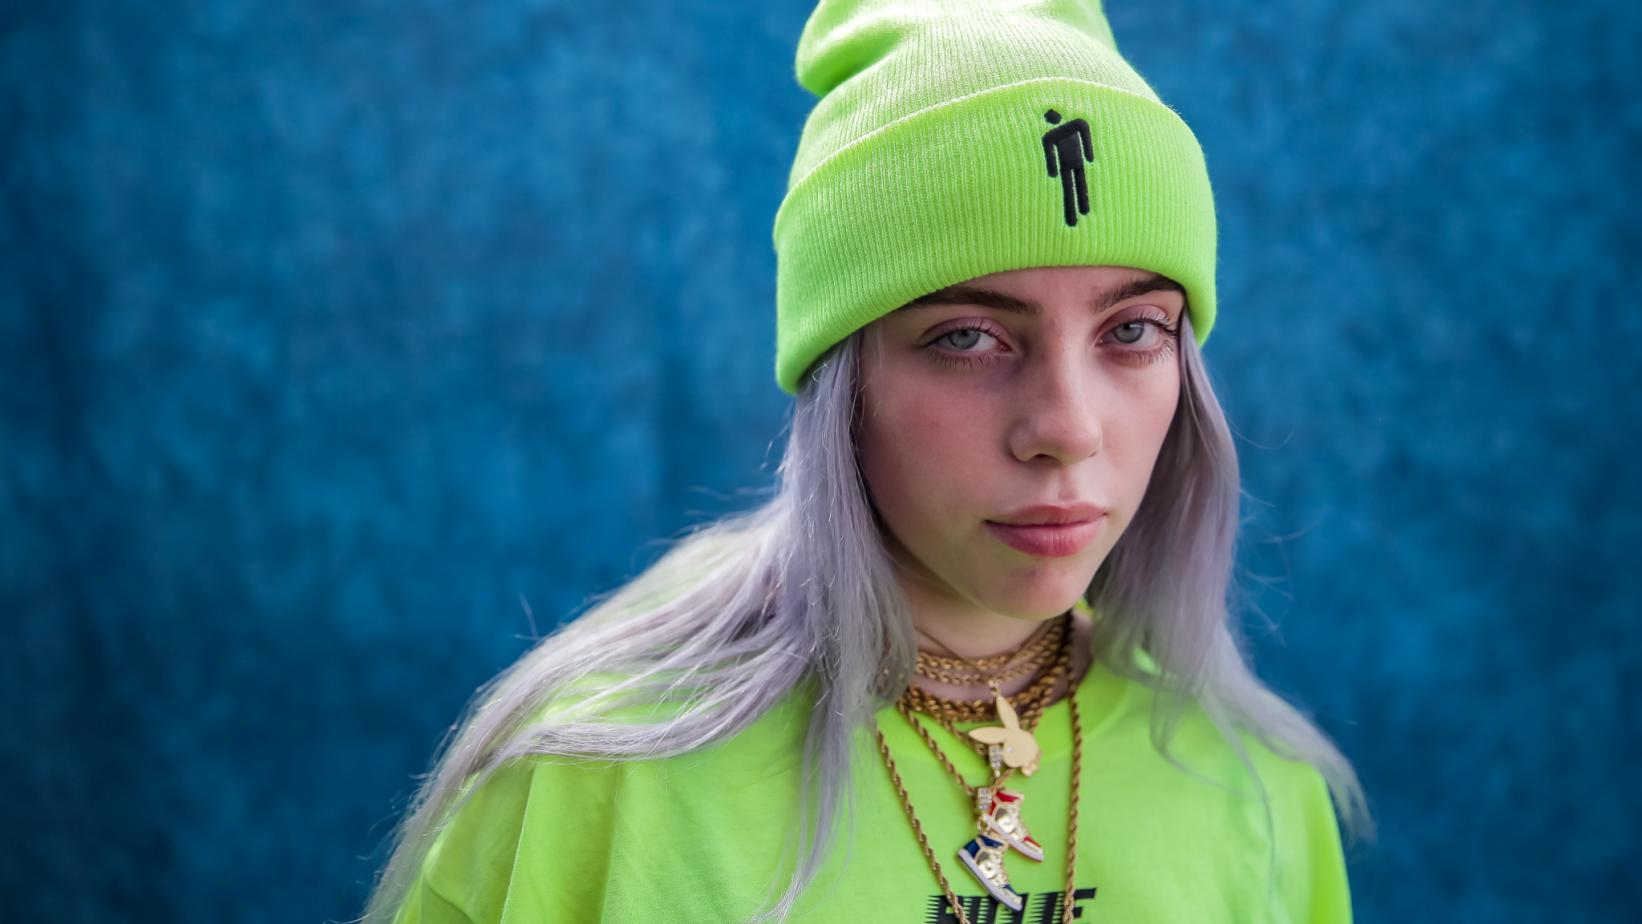 Billie Eilish proves that albums still thrive in the age of music streaming